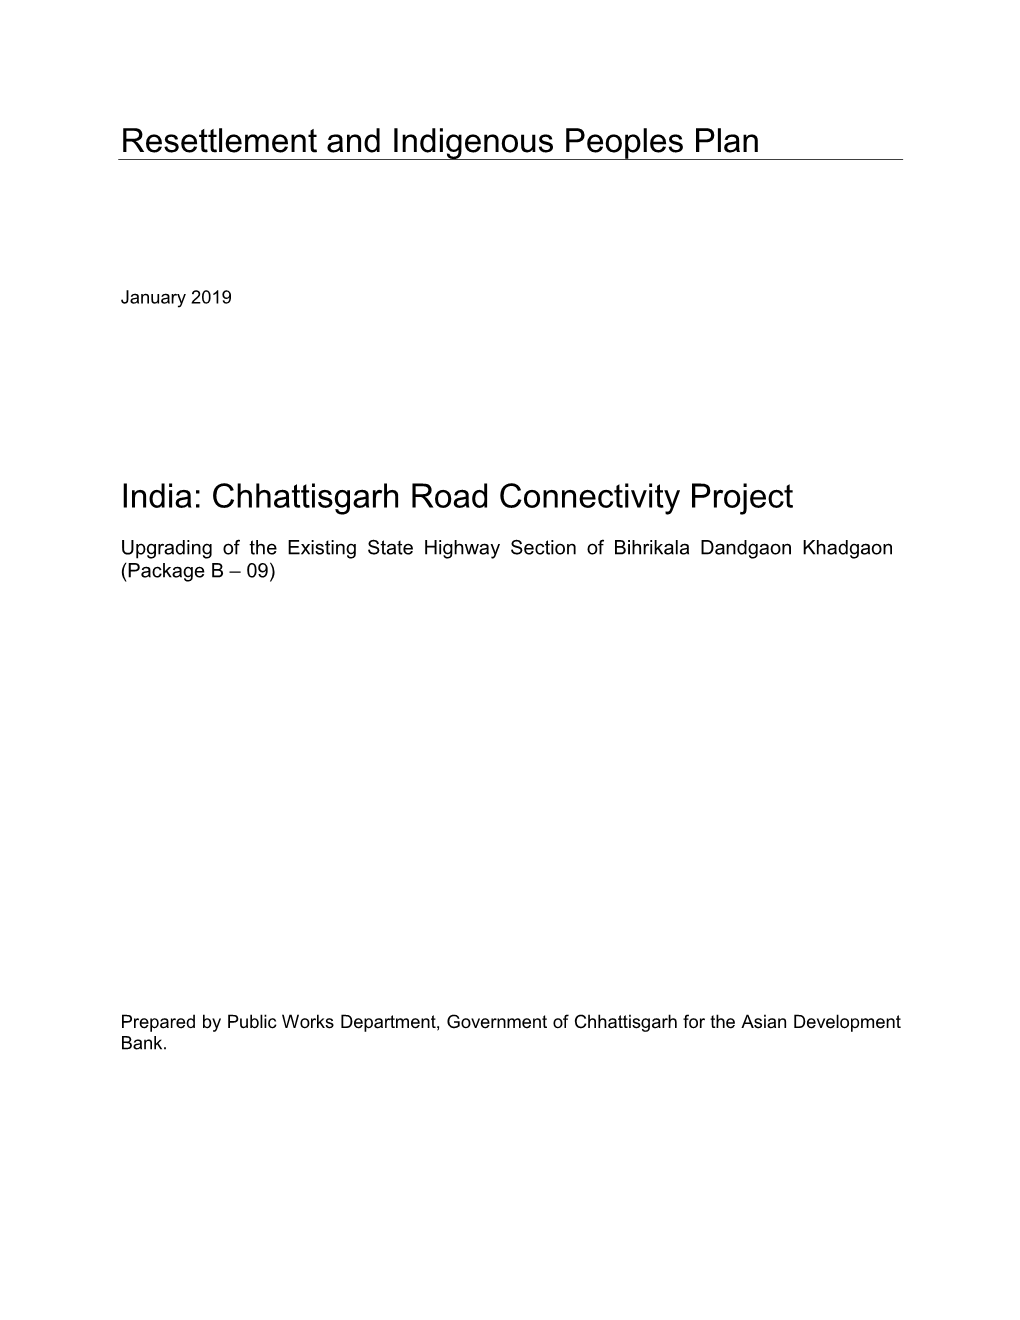 Resettlement and Indigenous Peoples Plan India: Chhattisgarh Road